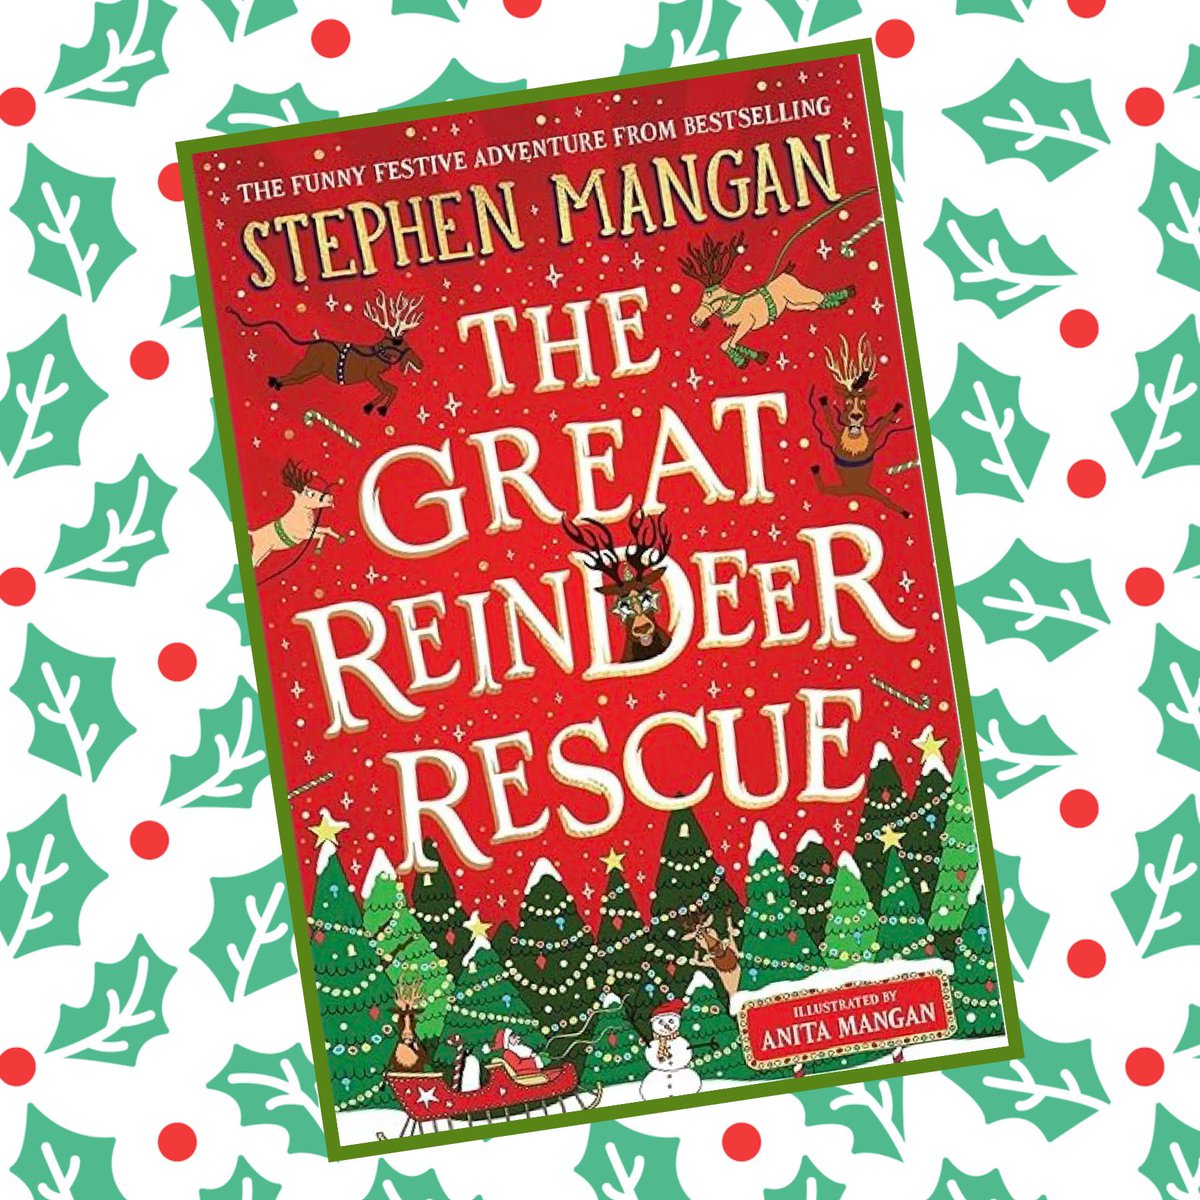 @Succreart @simonkids_UK @TomFletcher @PuffinBooks @MacmillanKidsUK @jamiesmart @DFB_storyhouse #BookAdvent23 Day 11 Time for a festive funny: #TheGreatReindeerRescue by @StephenMangan. Disgruntled reindeer, Dave, has to mount a round-the-world rescue mission to save Santa’s reindeer squad. Will Dave save Christmas?! 7+